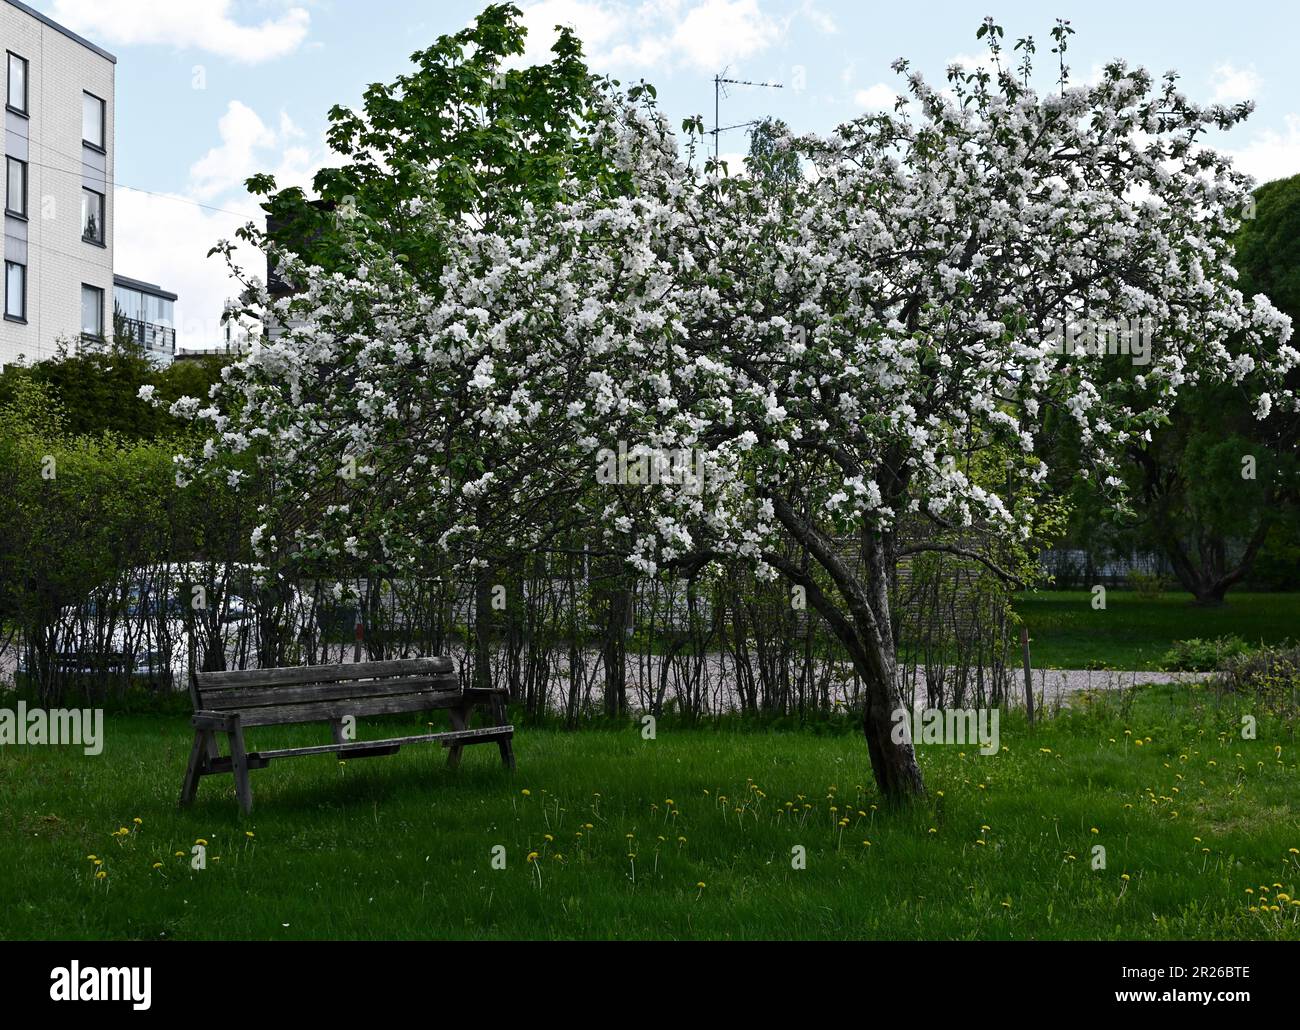 blooming apple tree and a wooden bench in the courtyard of a residential building Stock Photo